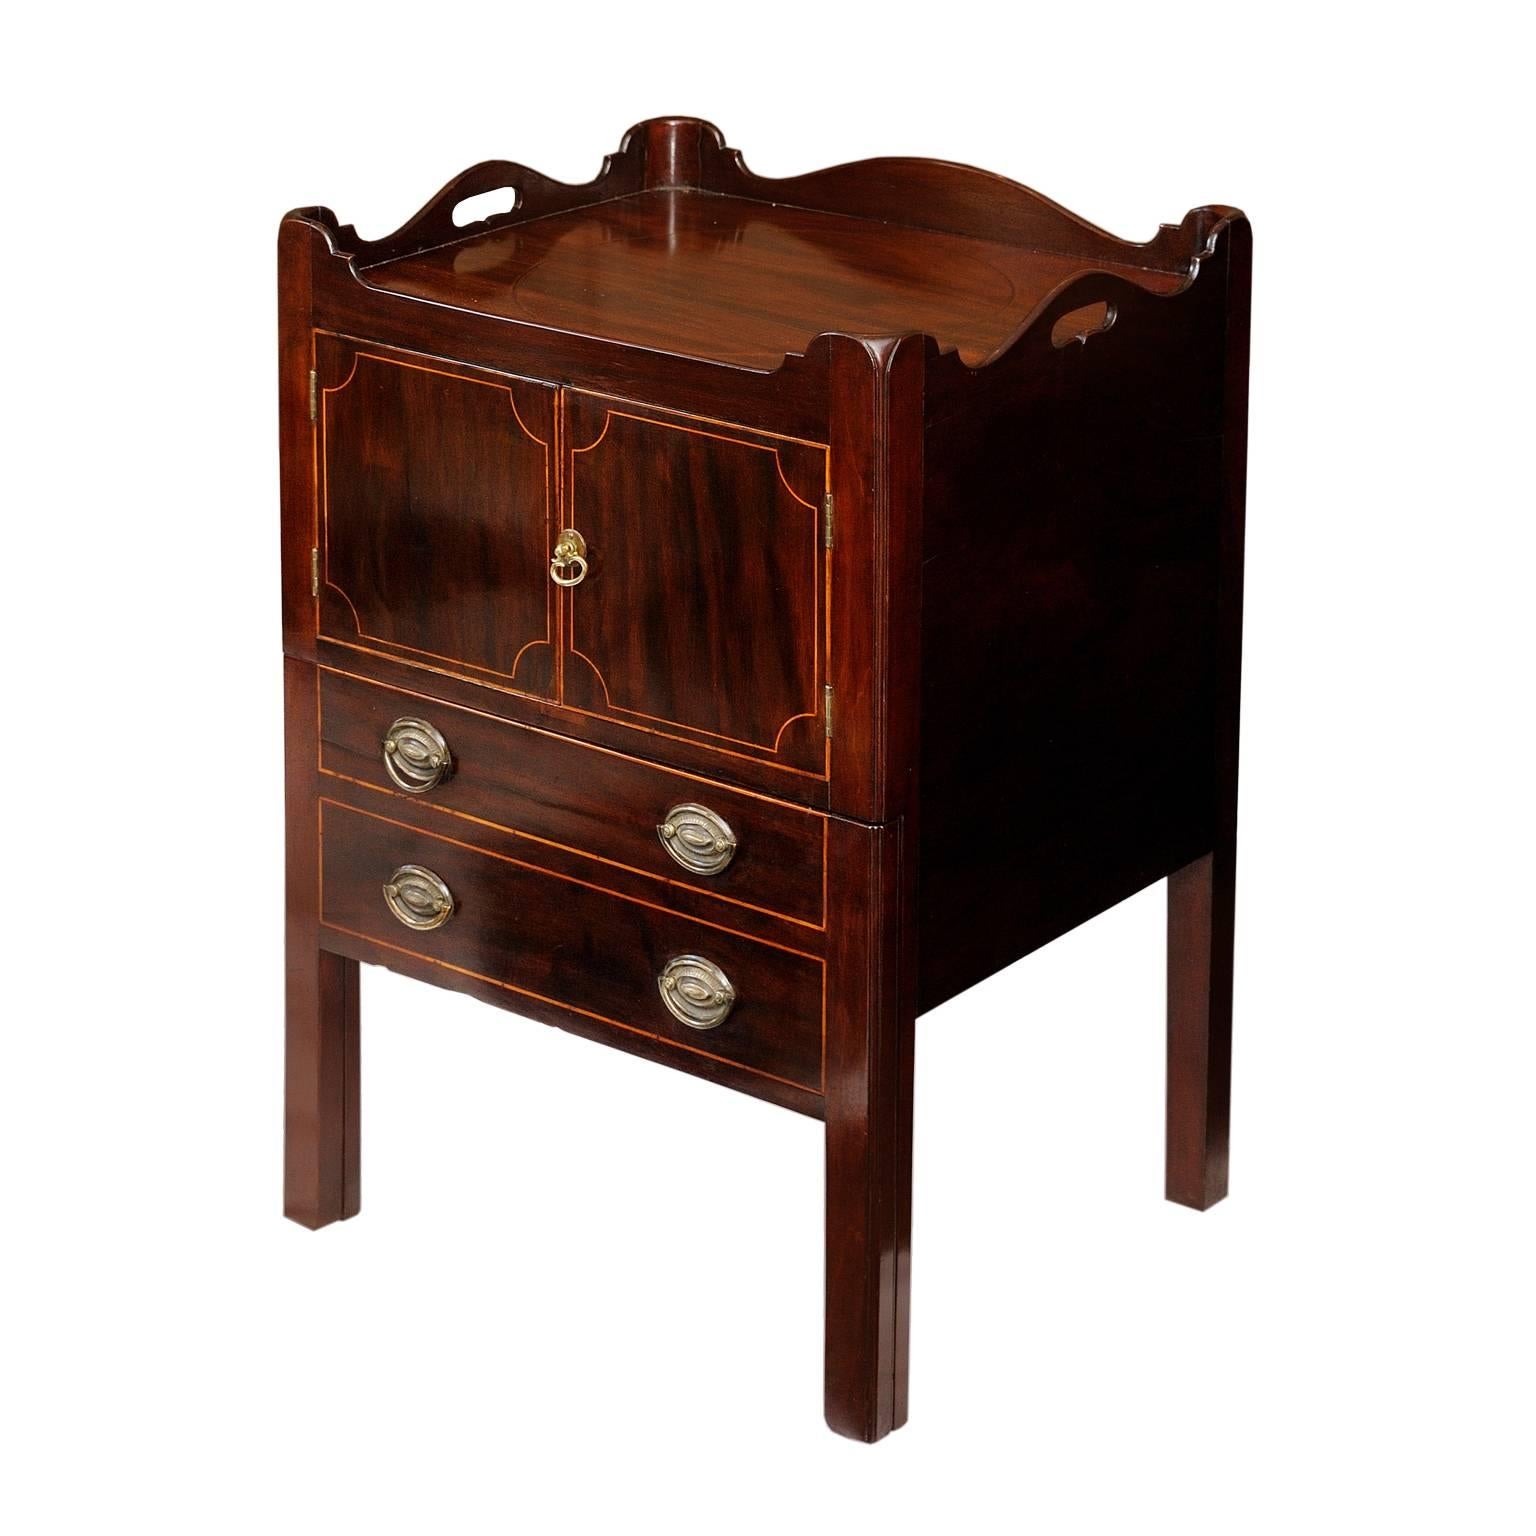 This is a rather lovely English late 18th century George III mahogany tray top commode or bedside Table. The commode has a pull-out drawer below with a cupboard situated above and is finished with boxwood stringing inlay detail and beautiful brass